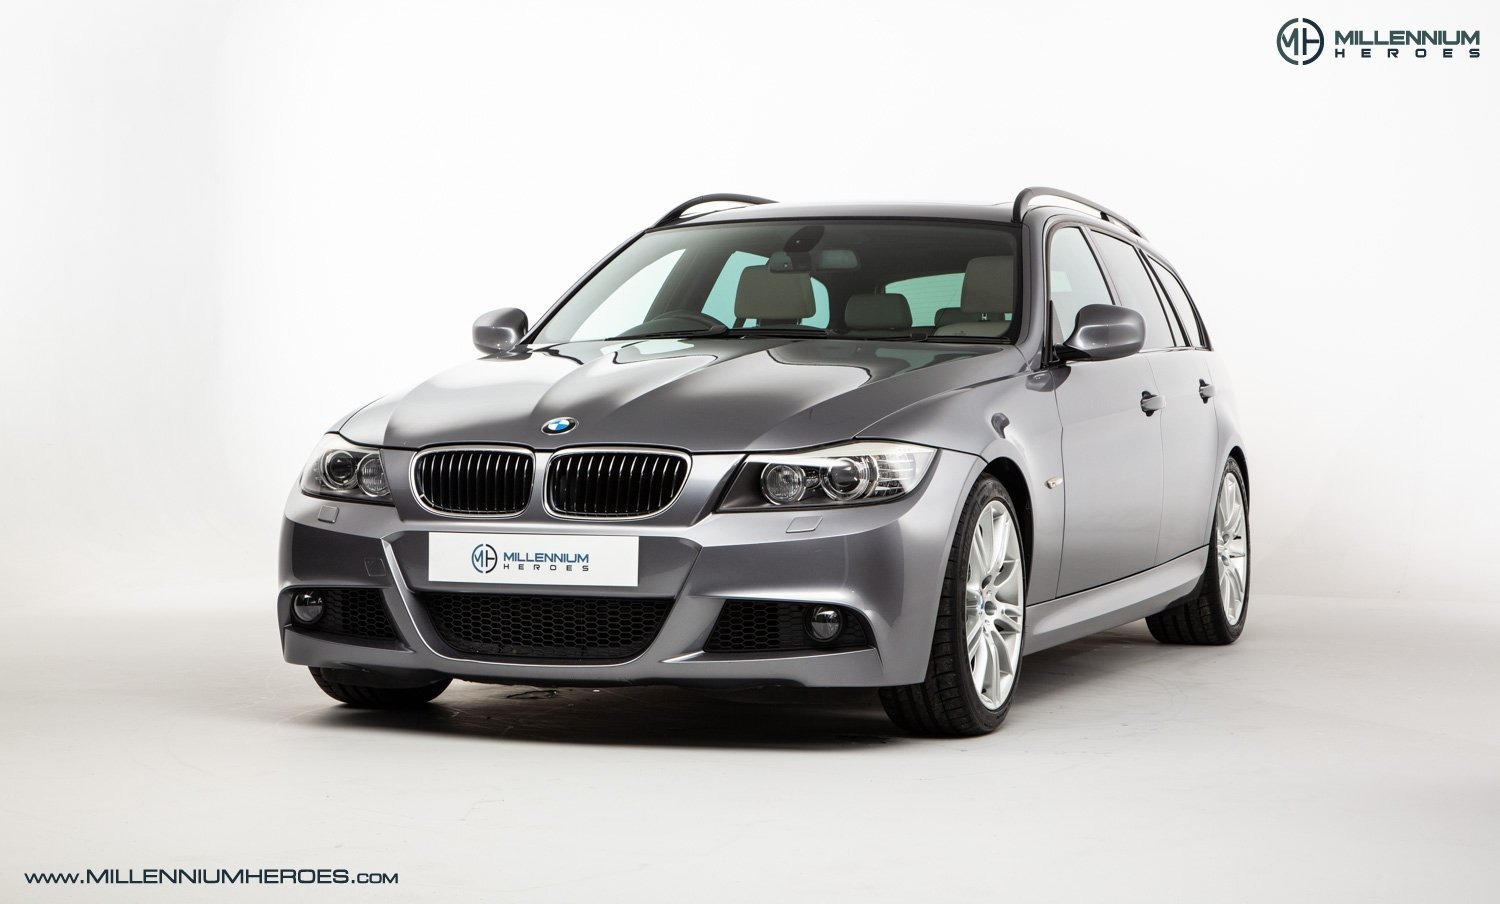 BMW E91 335i Touring in perfect condition